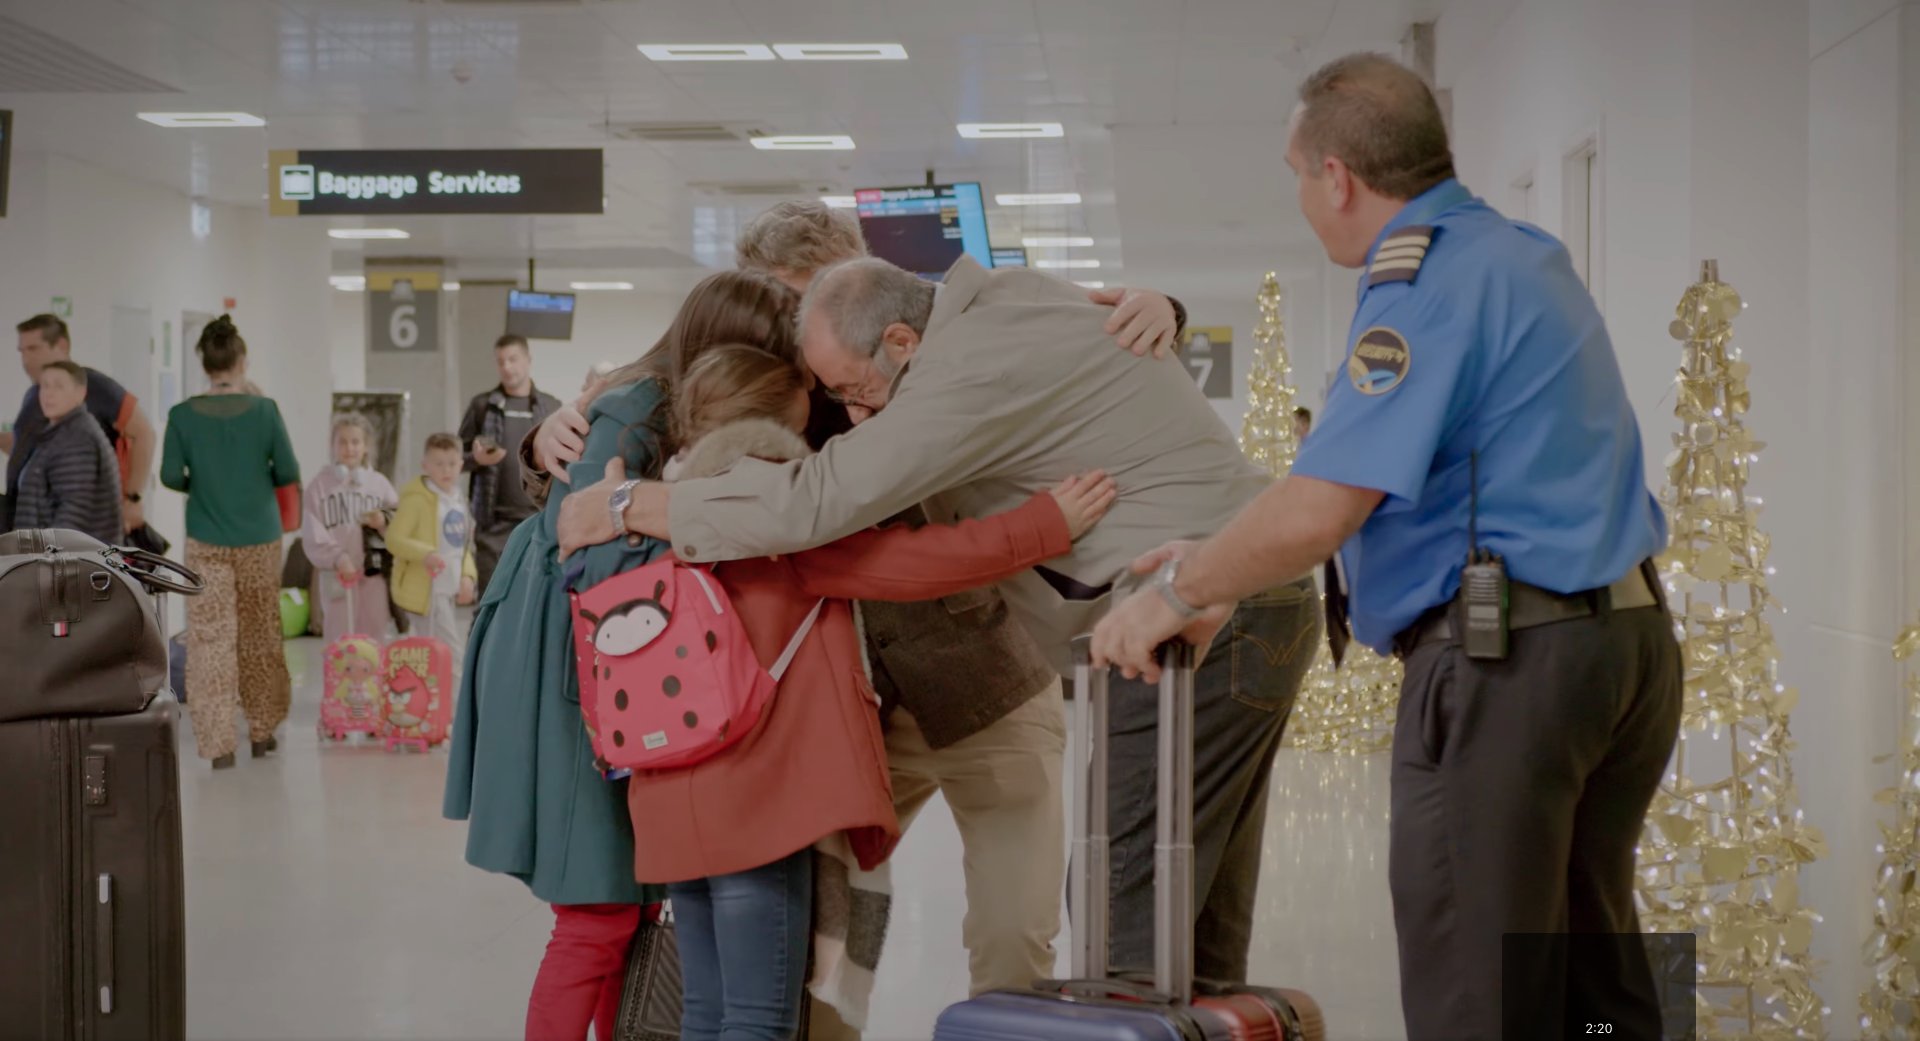 A Family is hugging each other at the airport